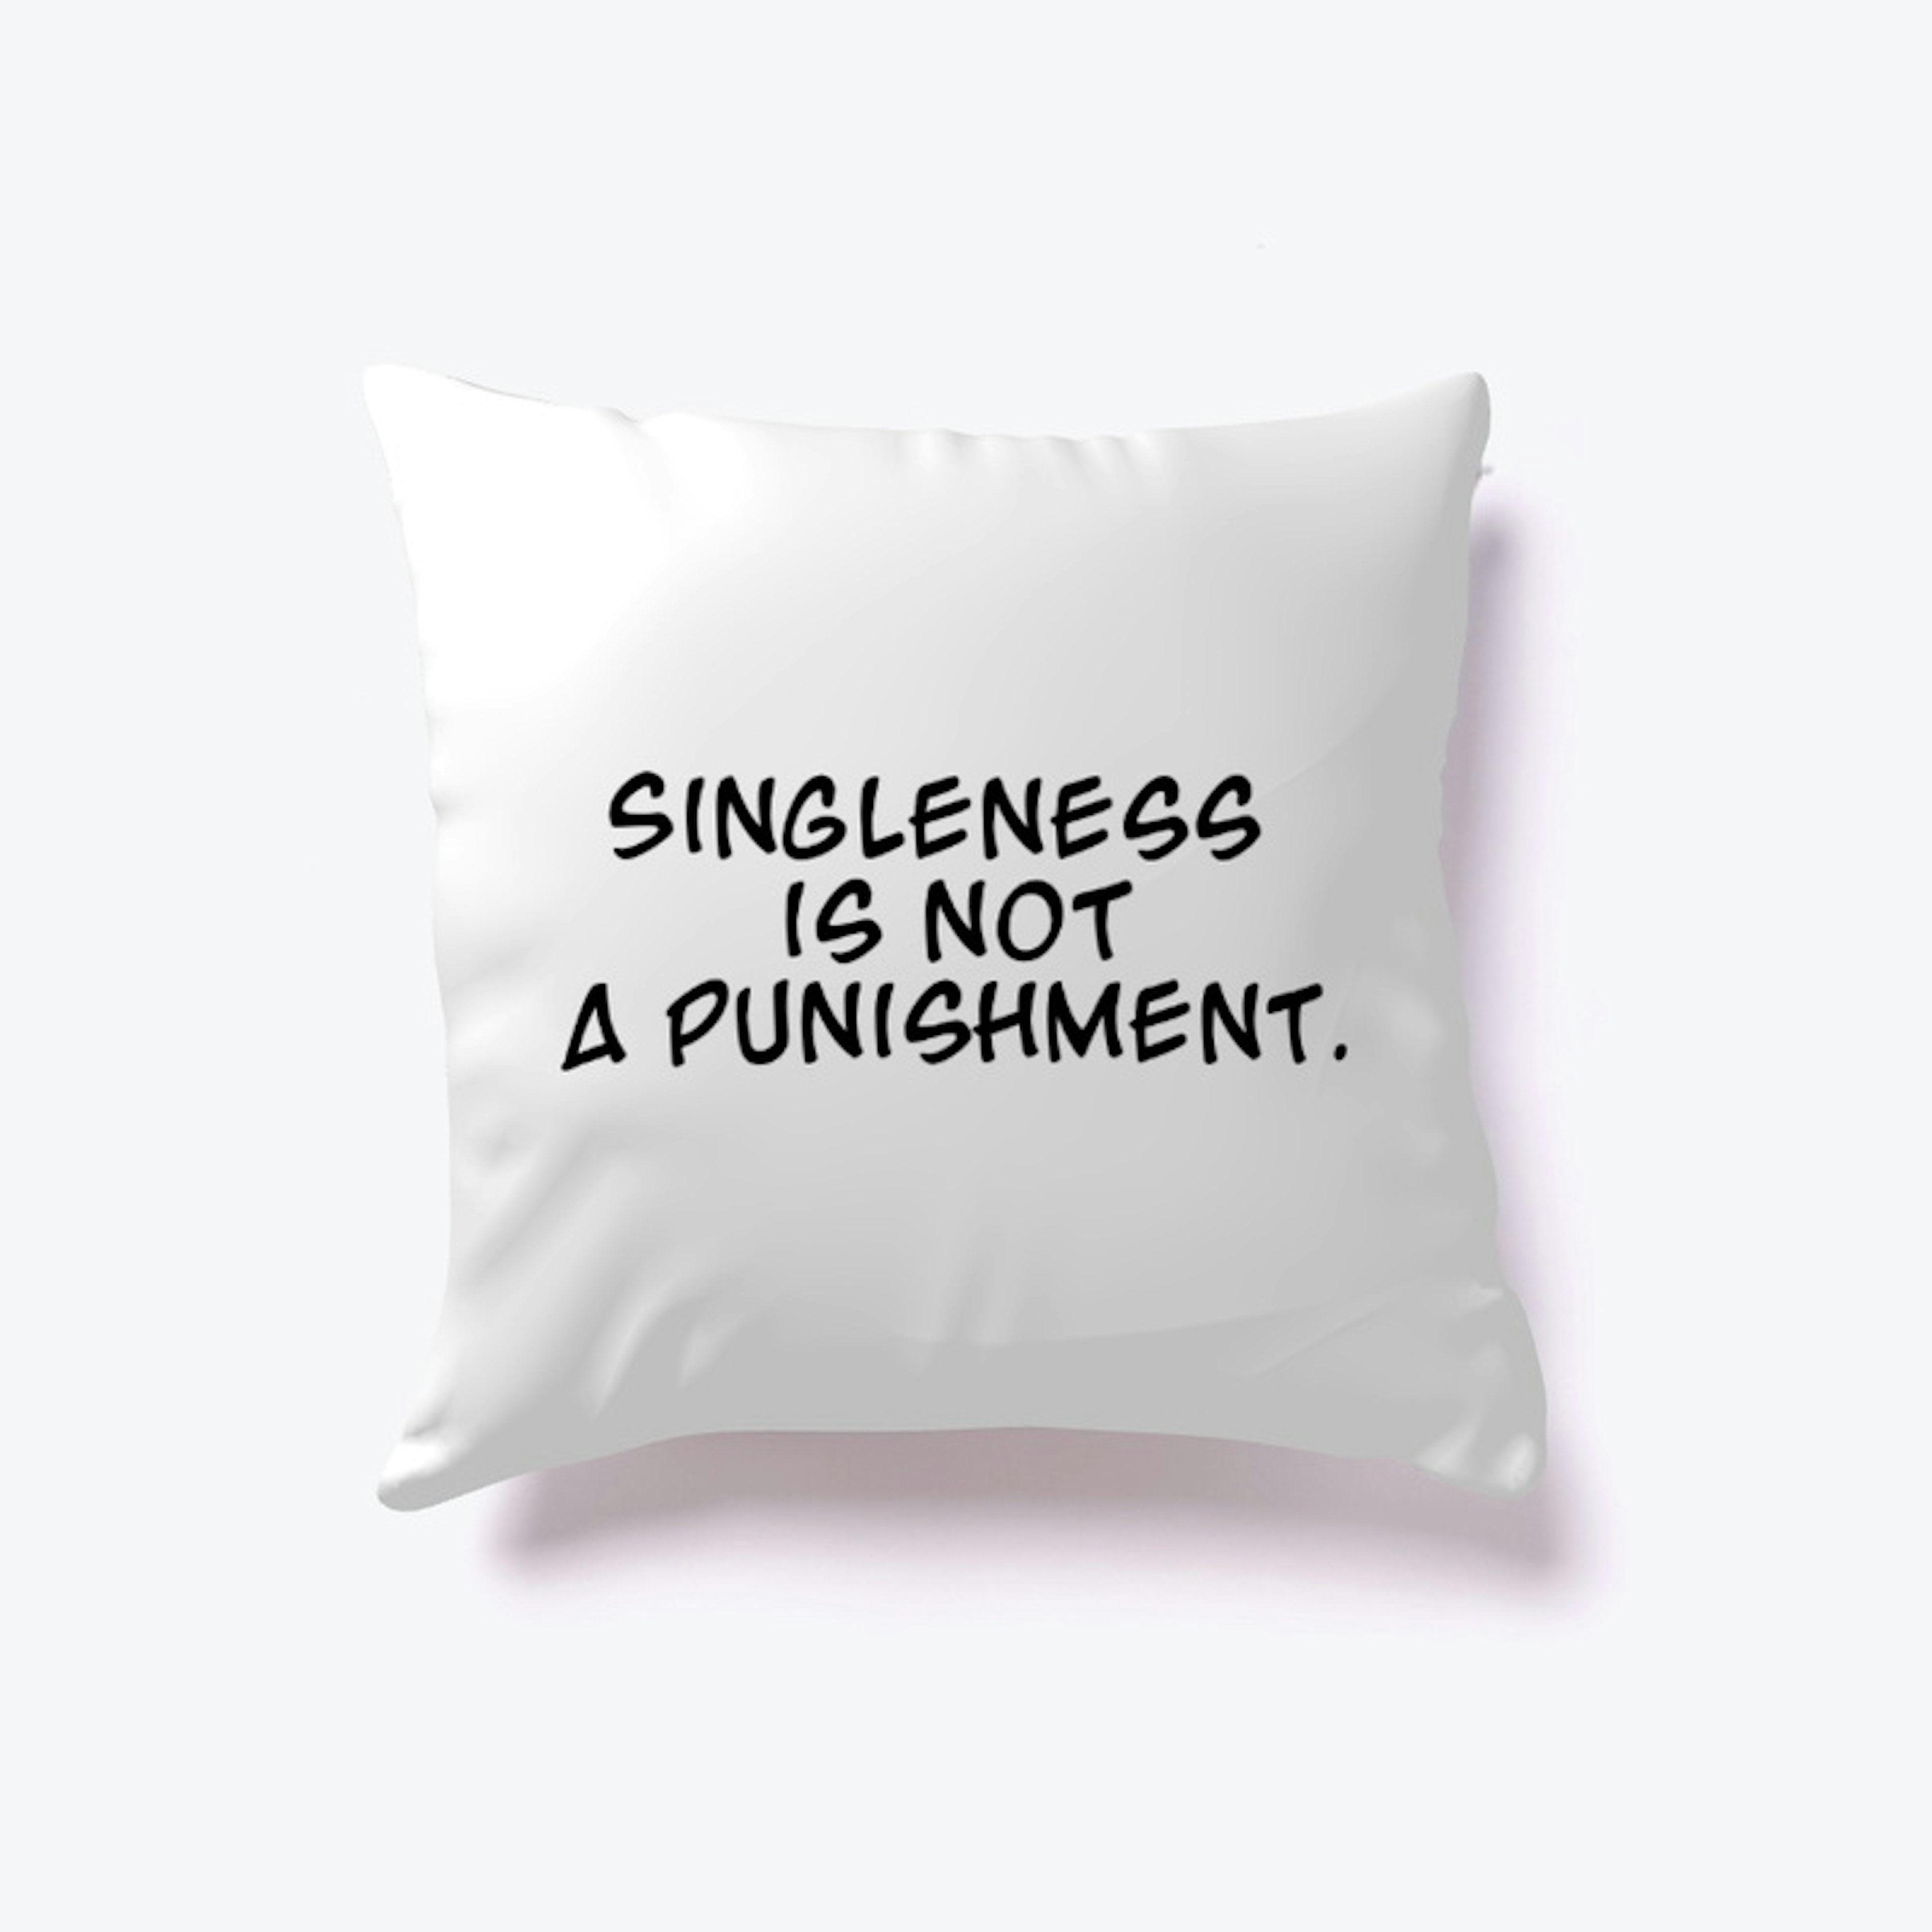 Singleness is not a Punishment